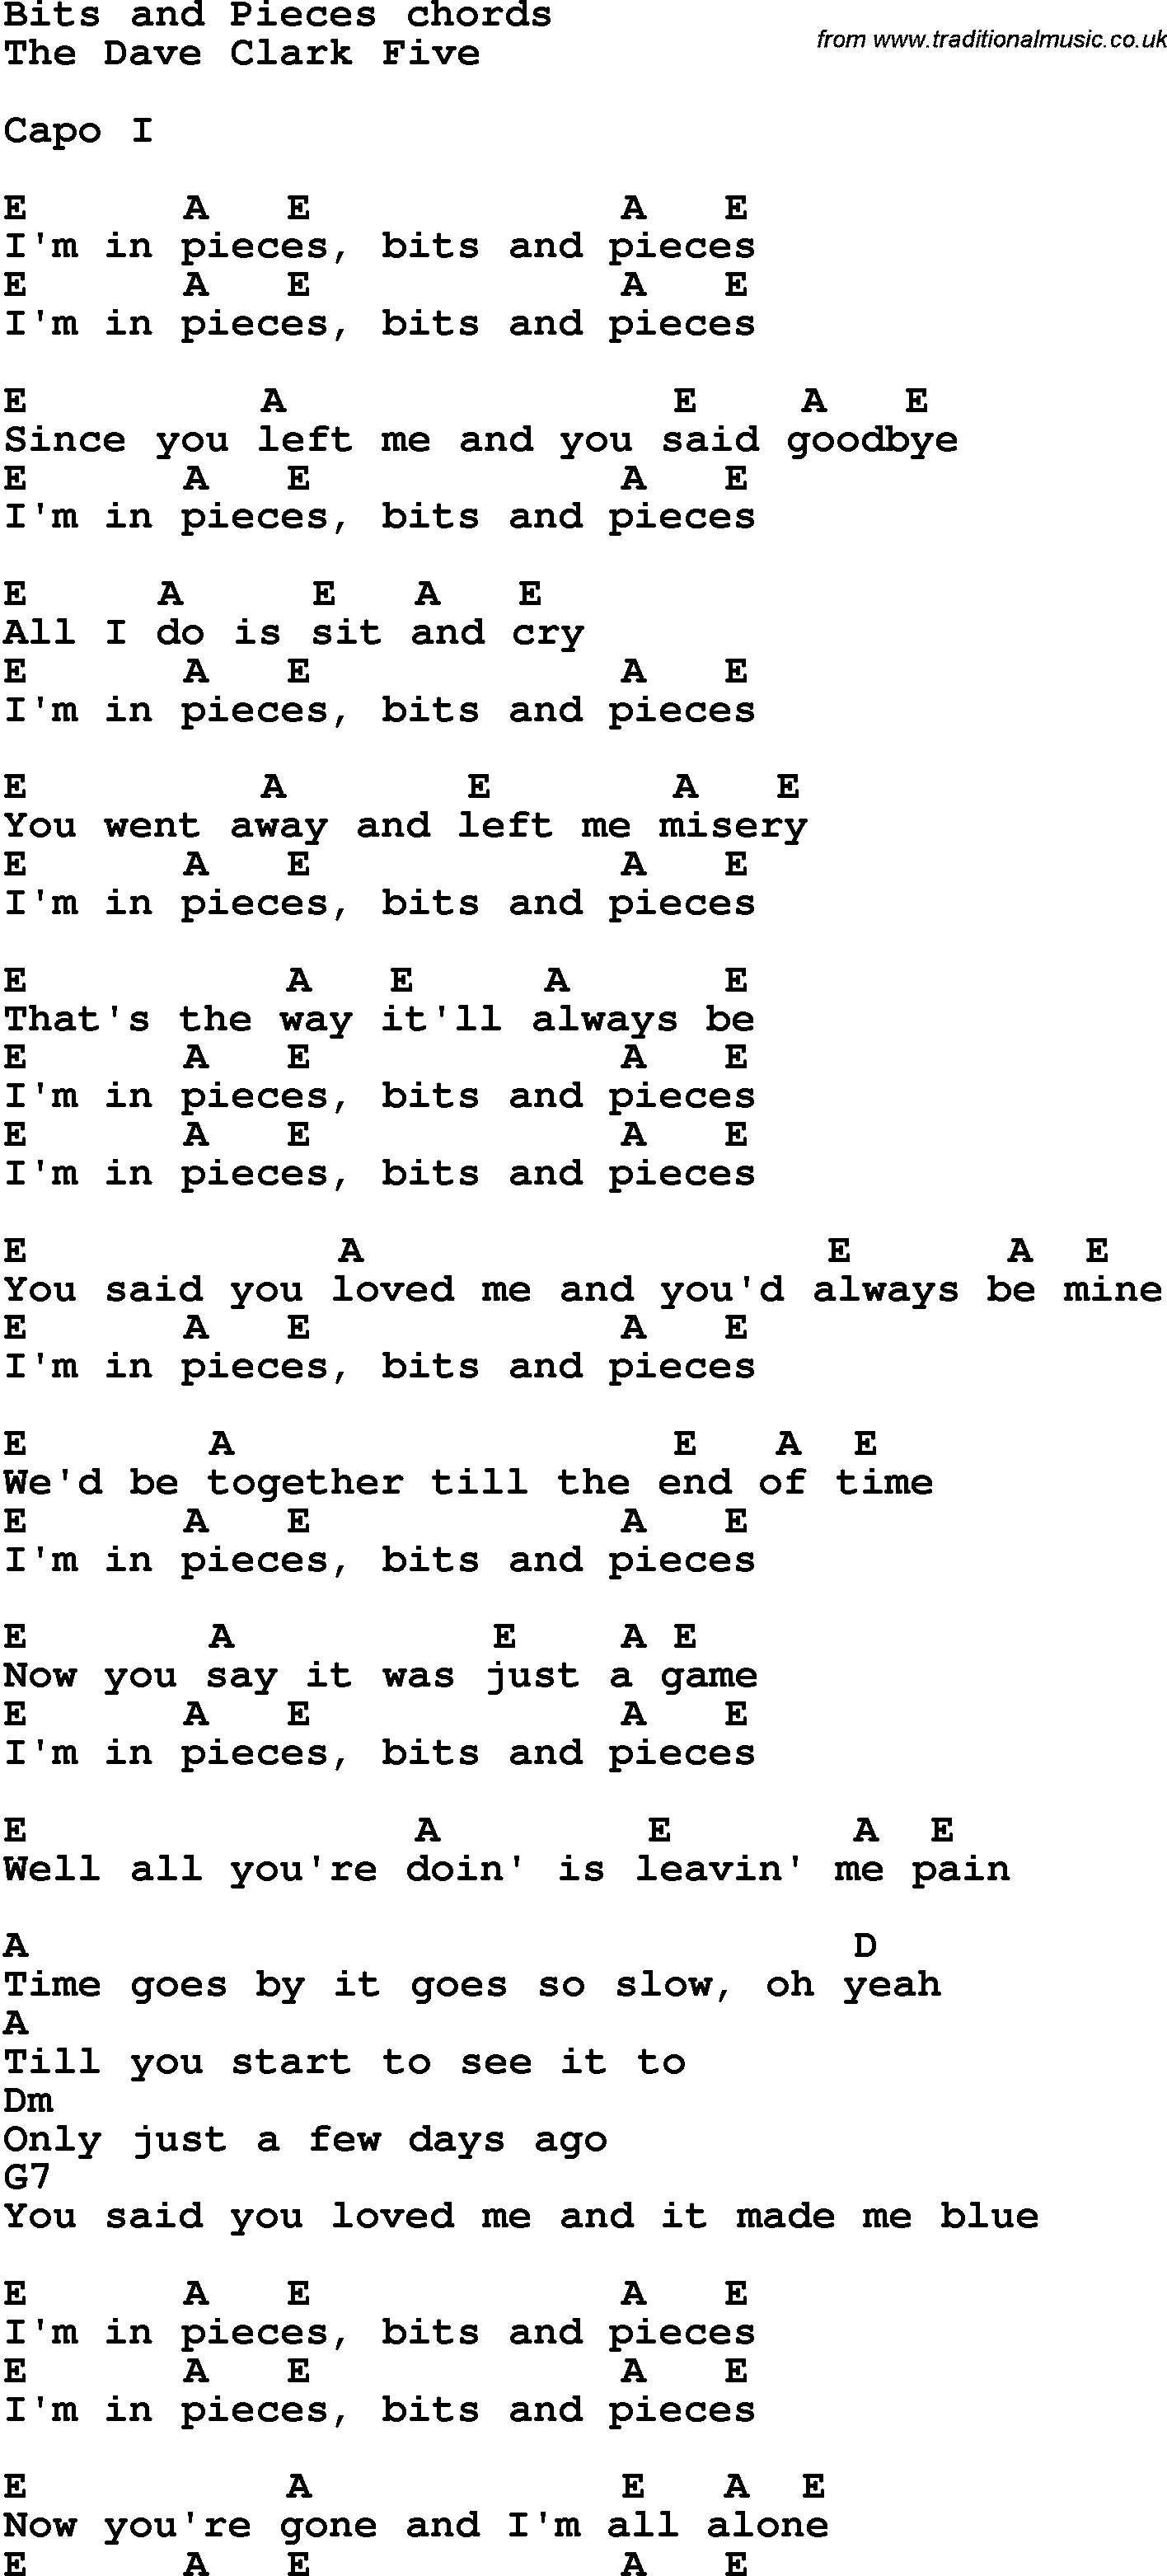 Song Lyrics with guitar chords for Bits And Pieces